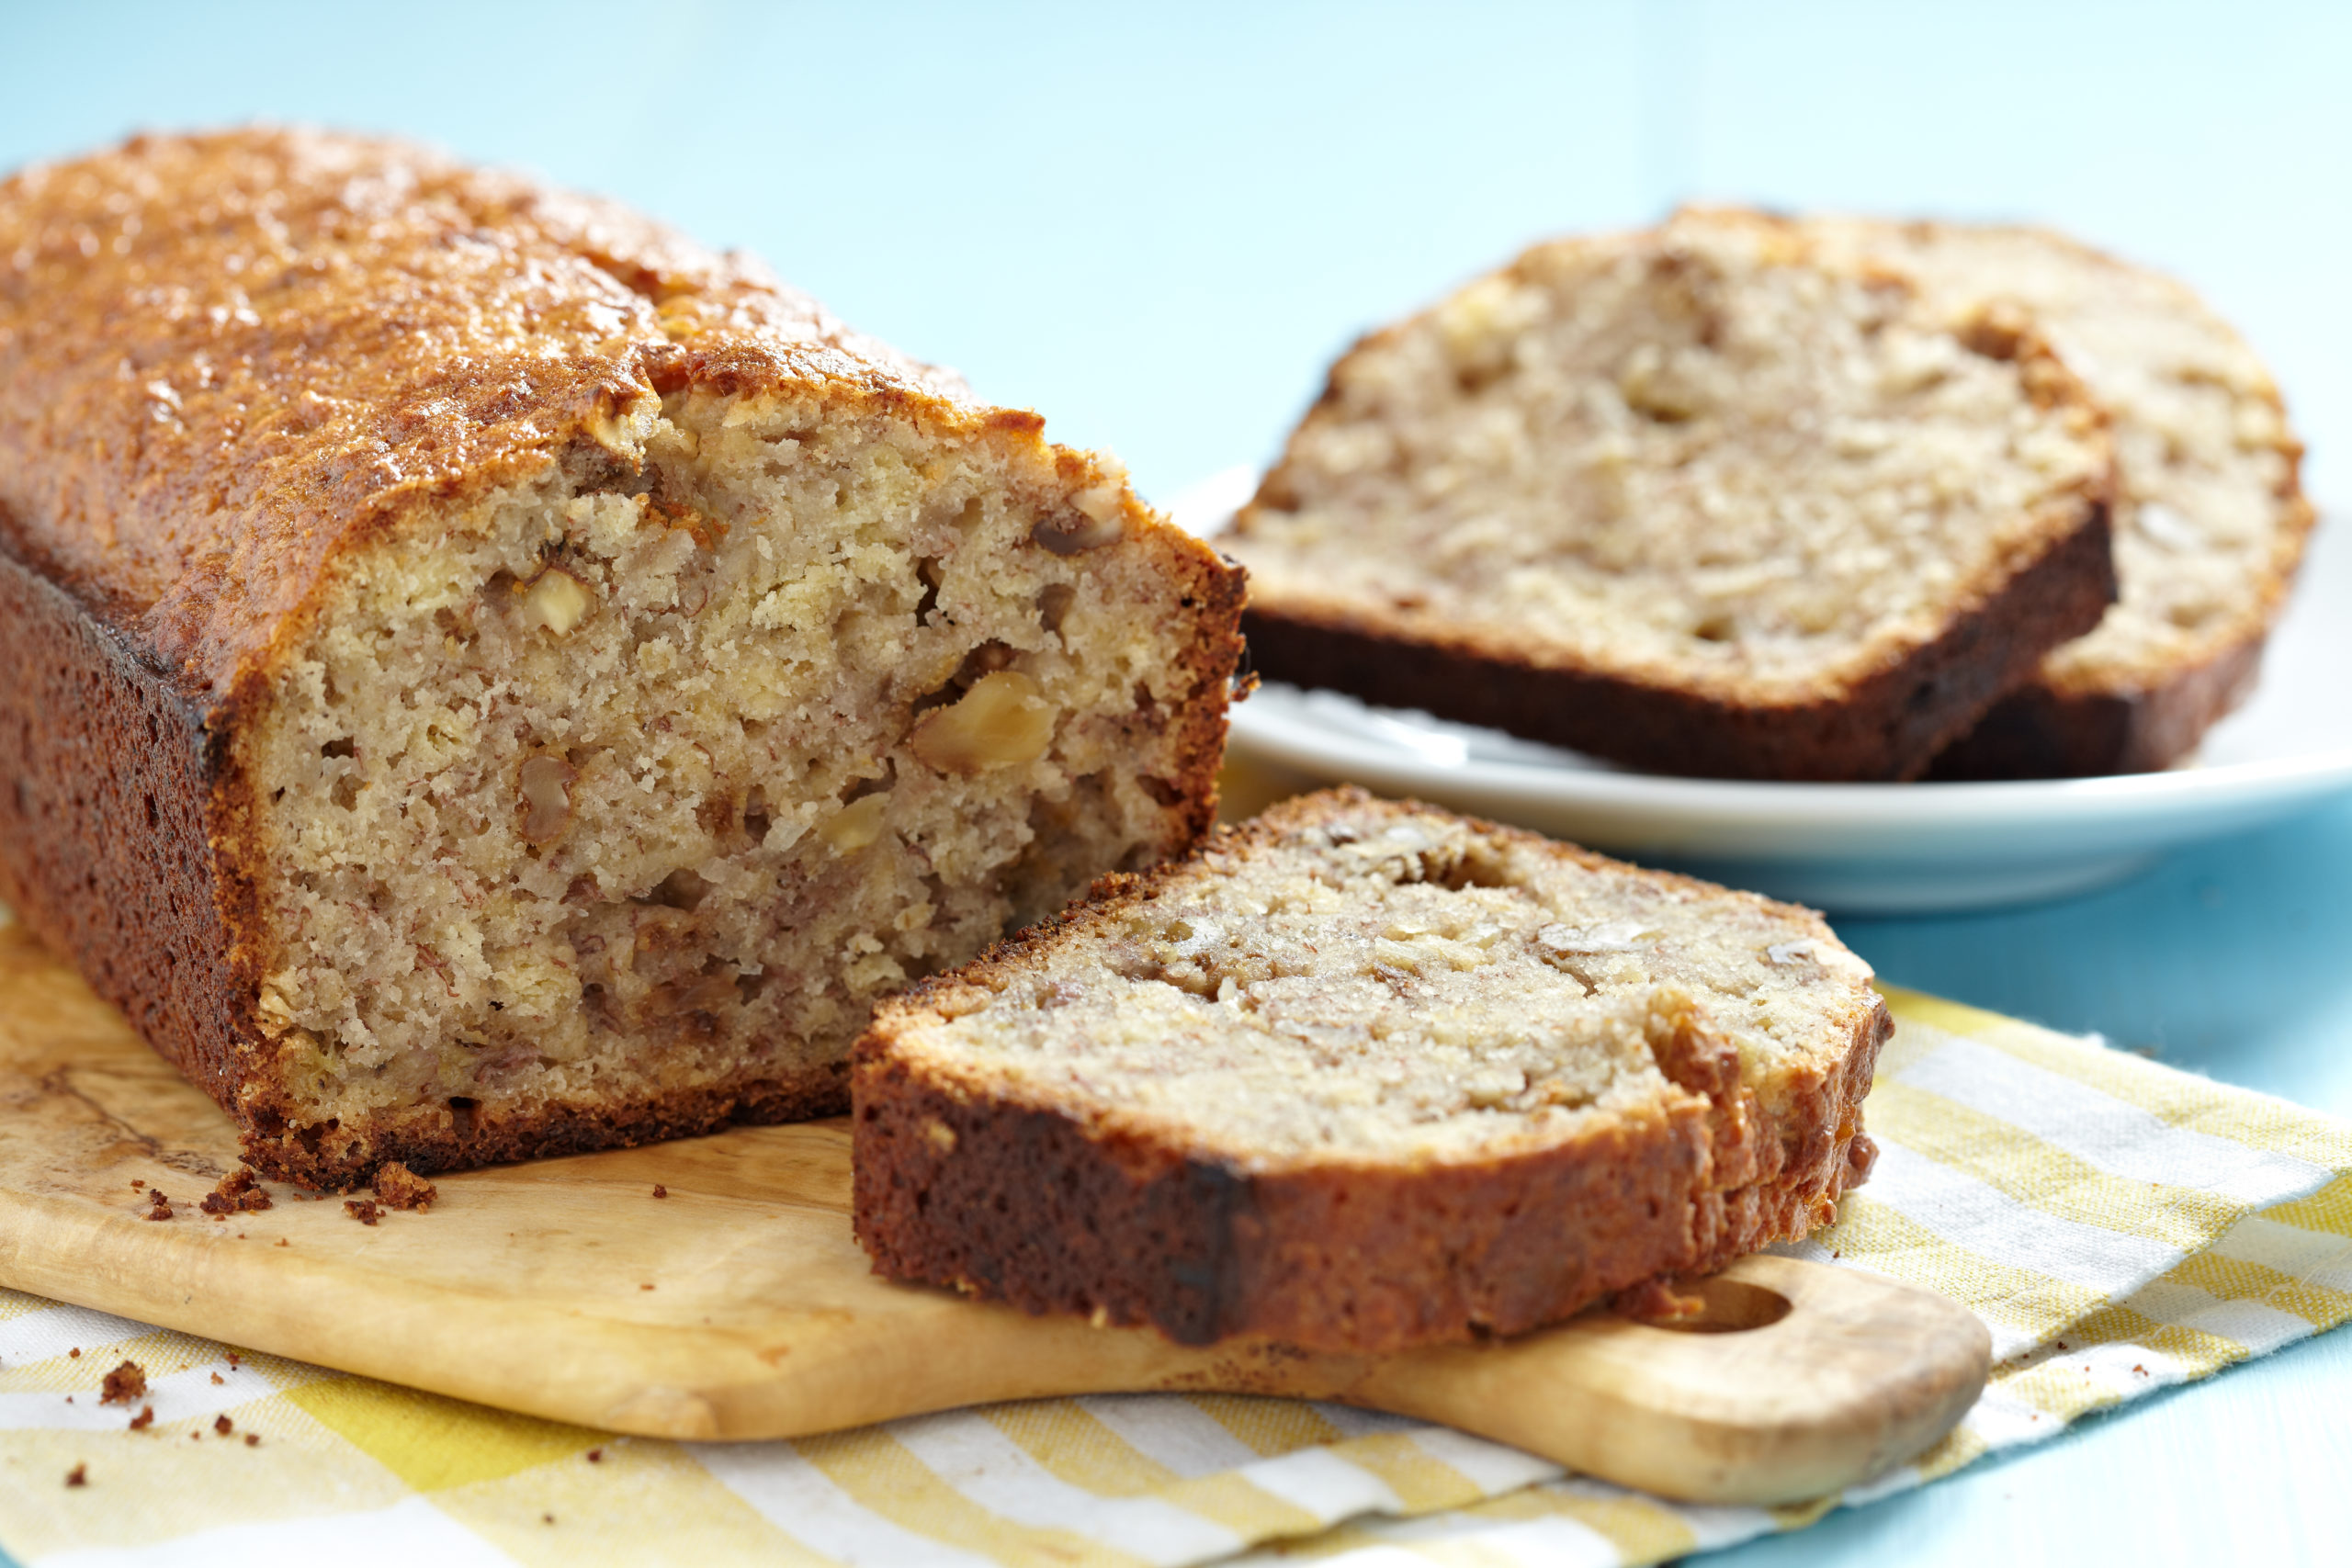 Making a banana loaf was a favourite pastime during lockdown.